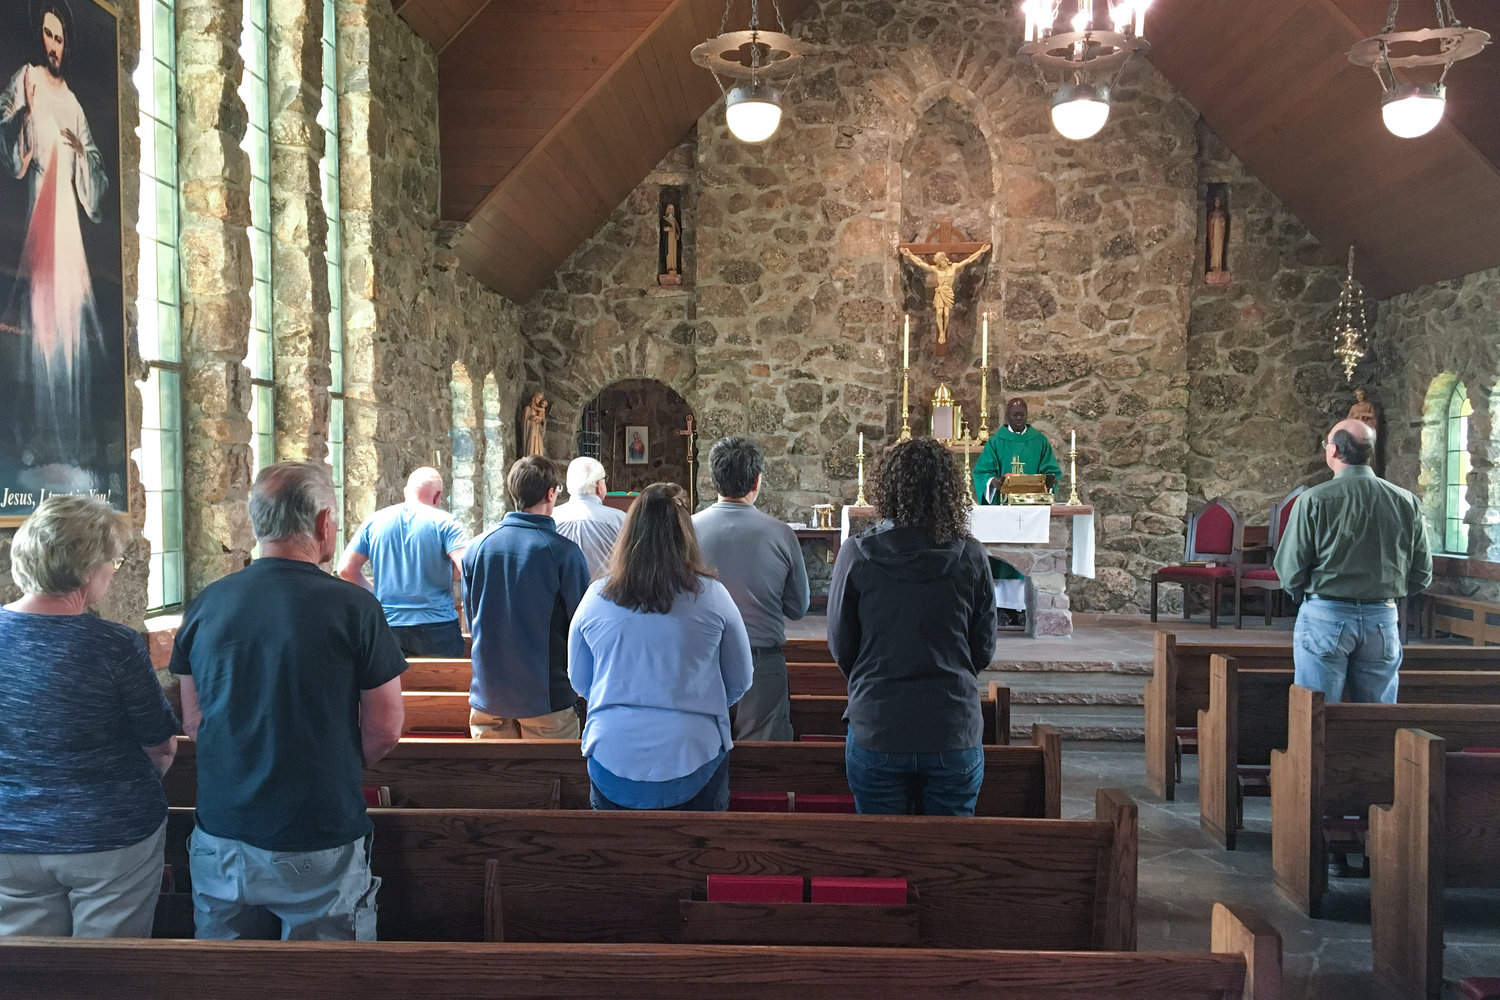 Visitors attend Mass in the Chapel on the Rock, formally named St. Catherine of Siena Chapel in Allenspark, Colorado, near Estes Park, is seen June 19, 2019. The chapel is on the grounds of the Camp St. Malo Retreat Center, which was made famous during St. John Paul II’s epic World Youth Day visit to the Denver in 1993.